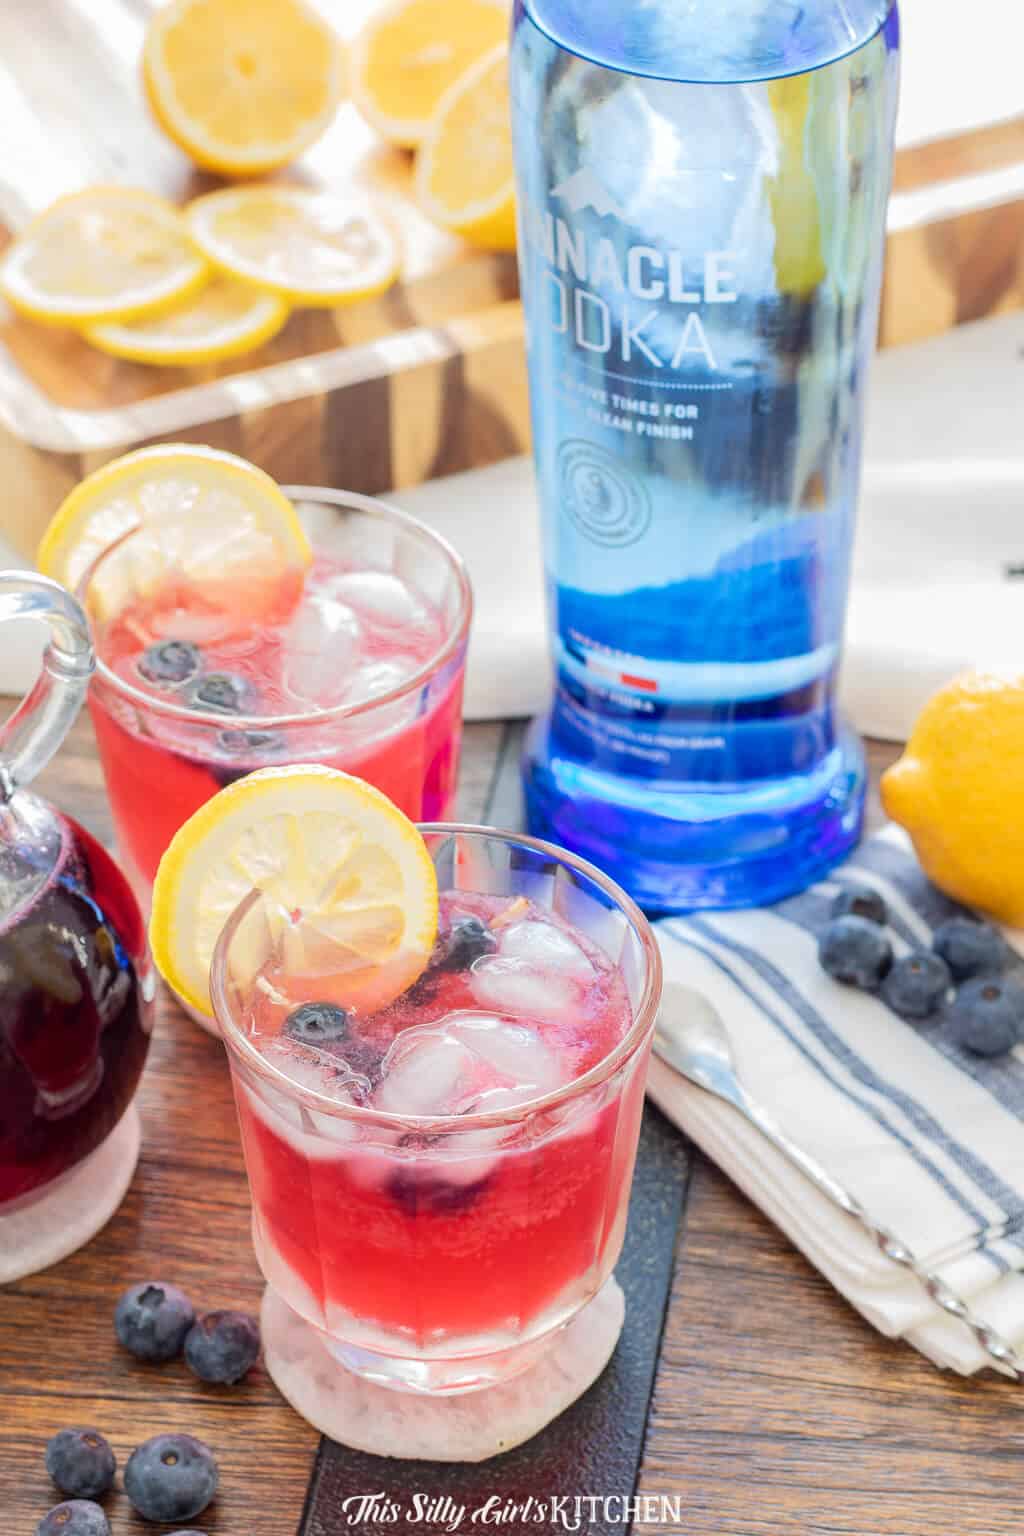 Blueberry Lemonade Cocktail, a light and refreshing vodka cocktail, a beautiful signature drink for parties! #recipe from thissillygirlskitchen.com #blueberry #lemonade #blueberrylemonade #cocktail #vodka #vodkacoctail #party #blueberrylemonadecocktail